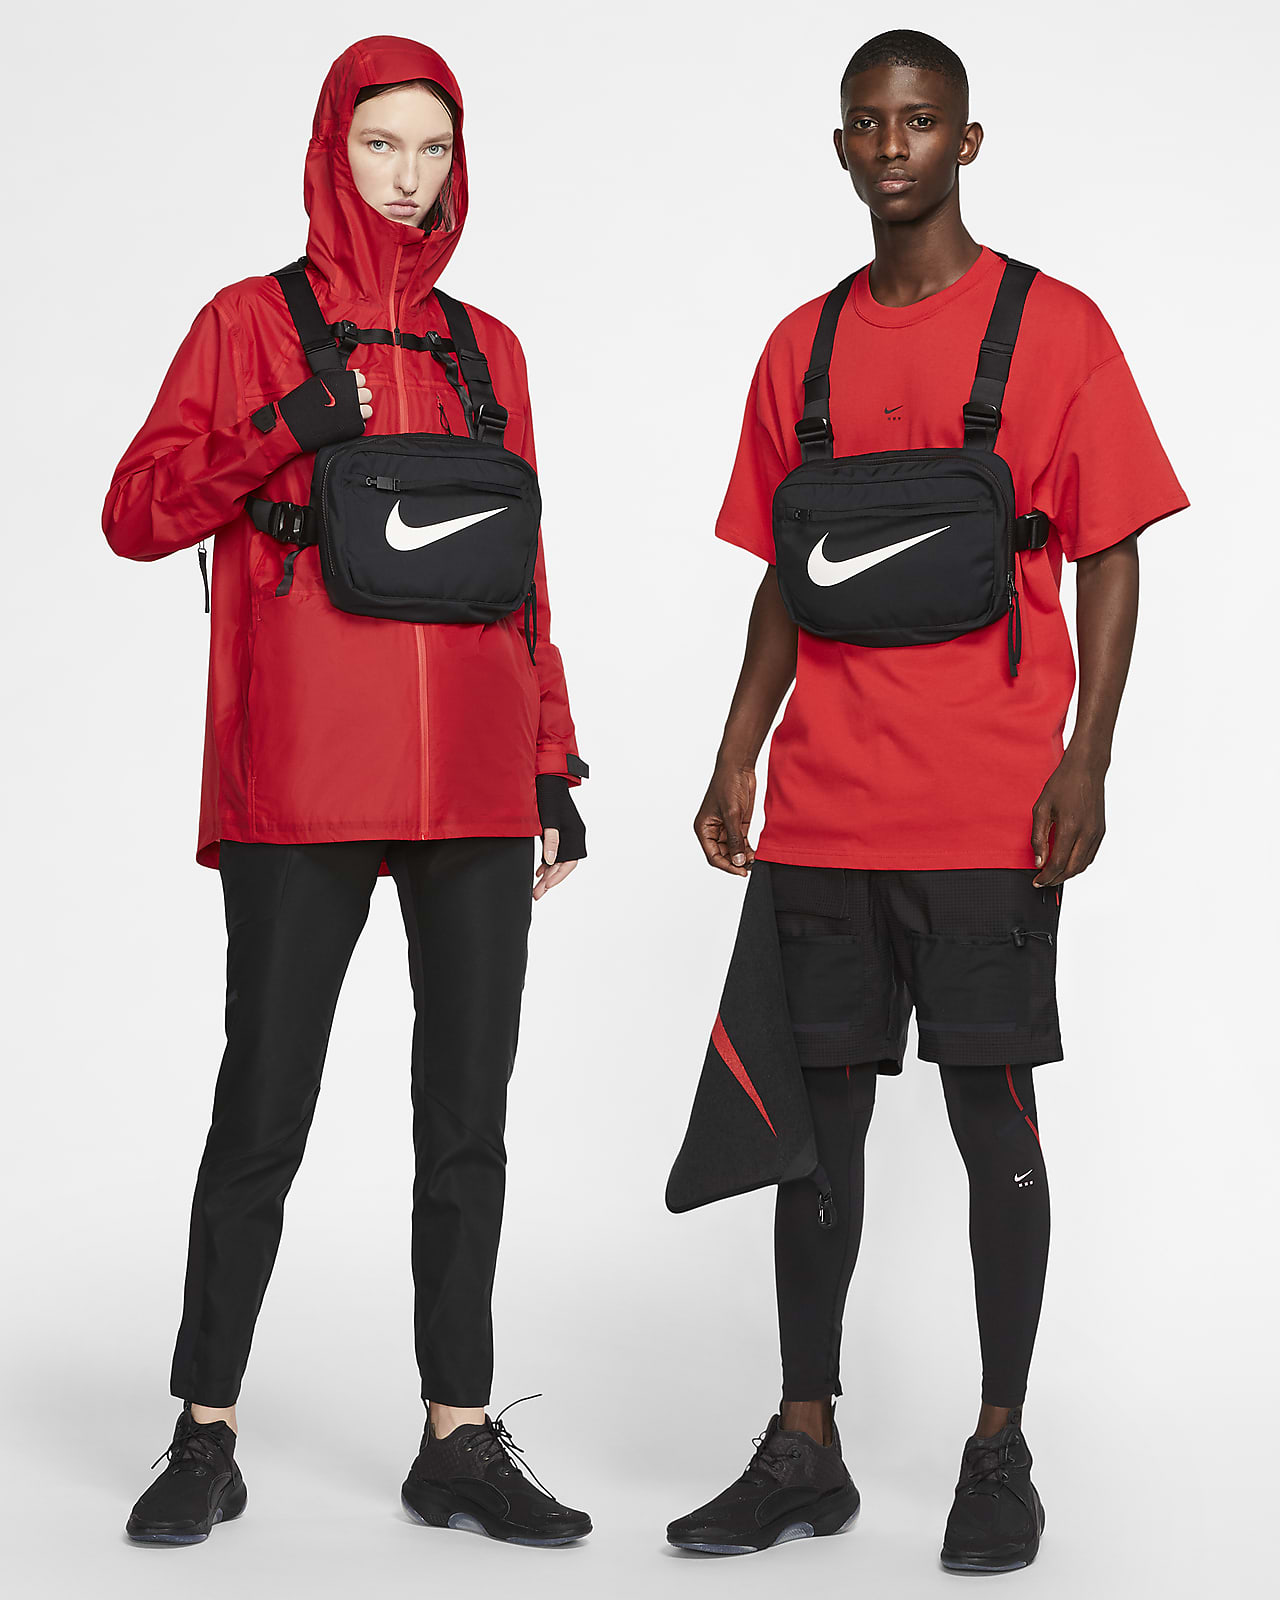 nike chest pouch